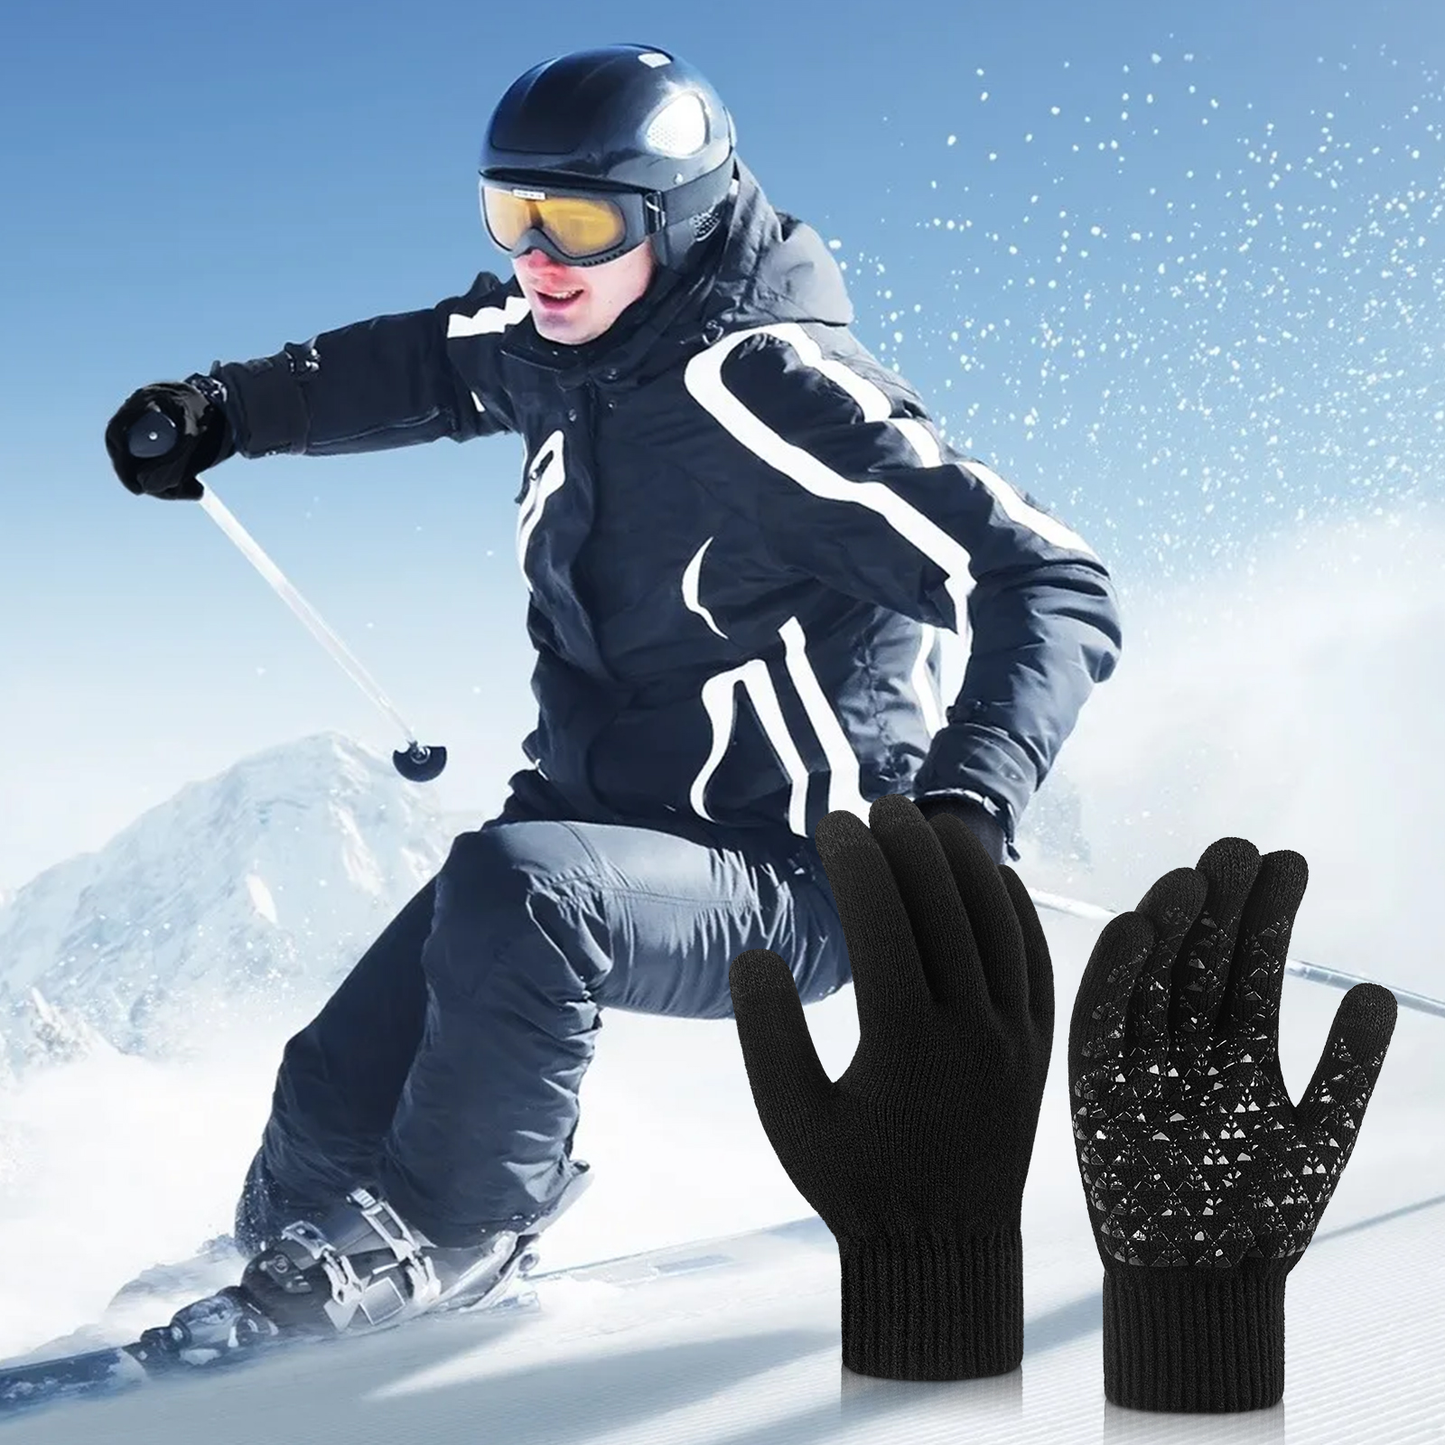 Loritta 4 Pair Winter Cycling Touch Screen Gloves Bike Elastic Cuff Gloves Warm Knit Women for Outdoor